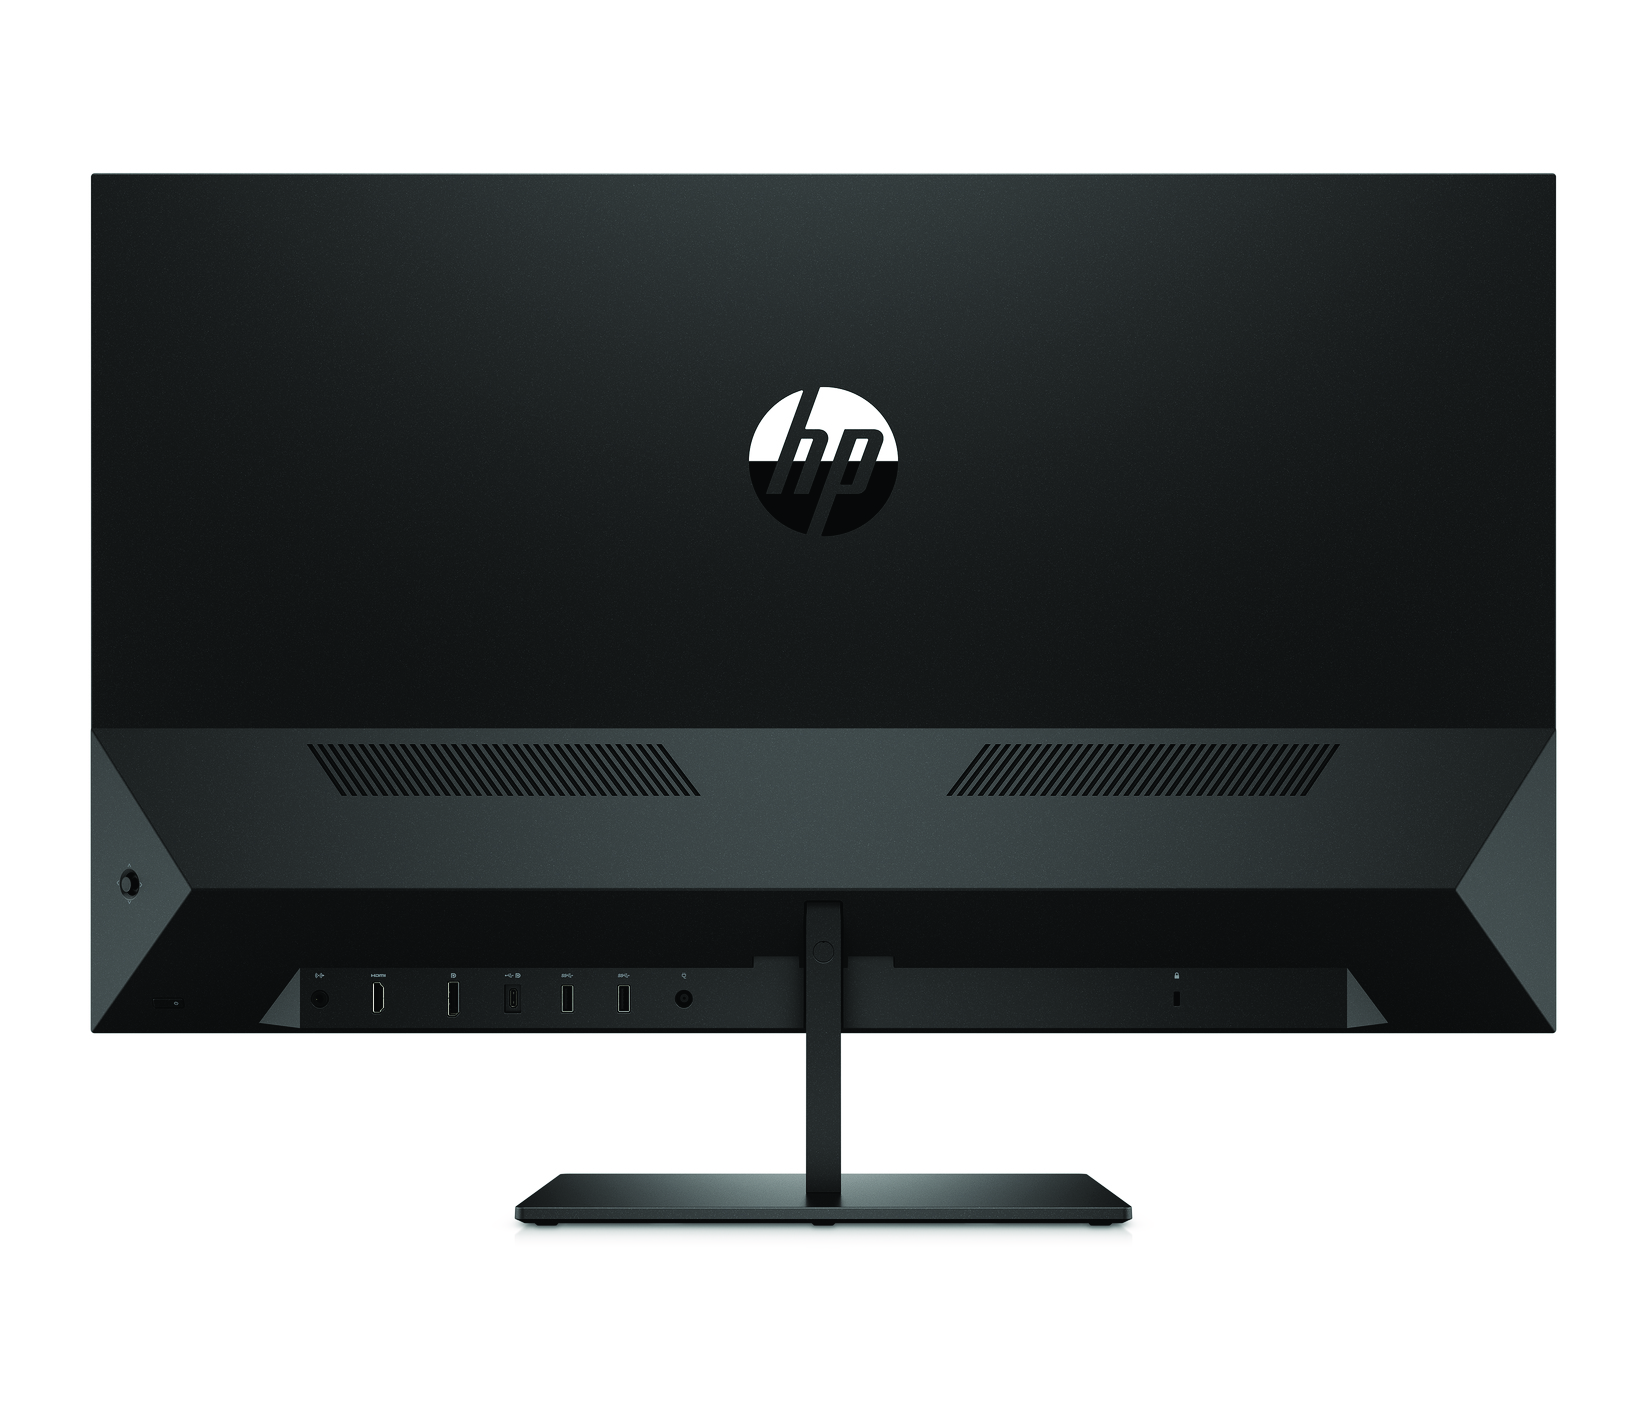 hp launches new monitors and all in one ces 2019 pavilion 32 qhd display  rear